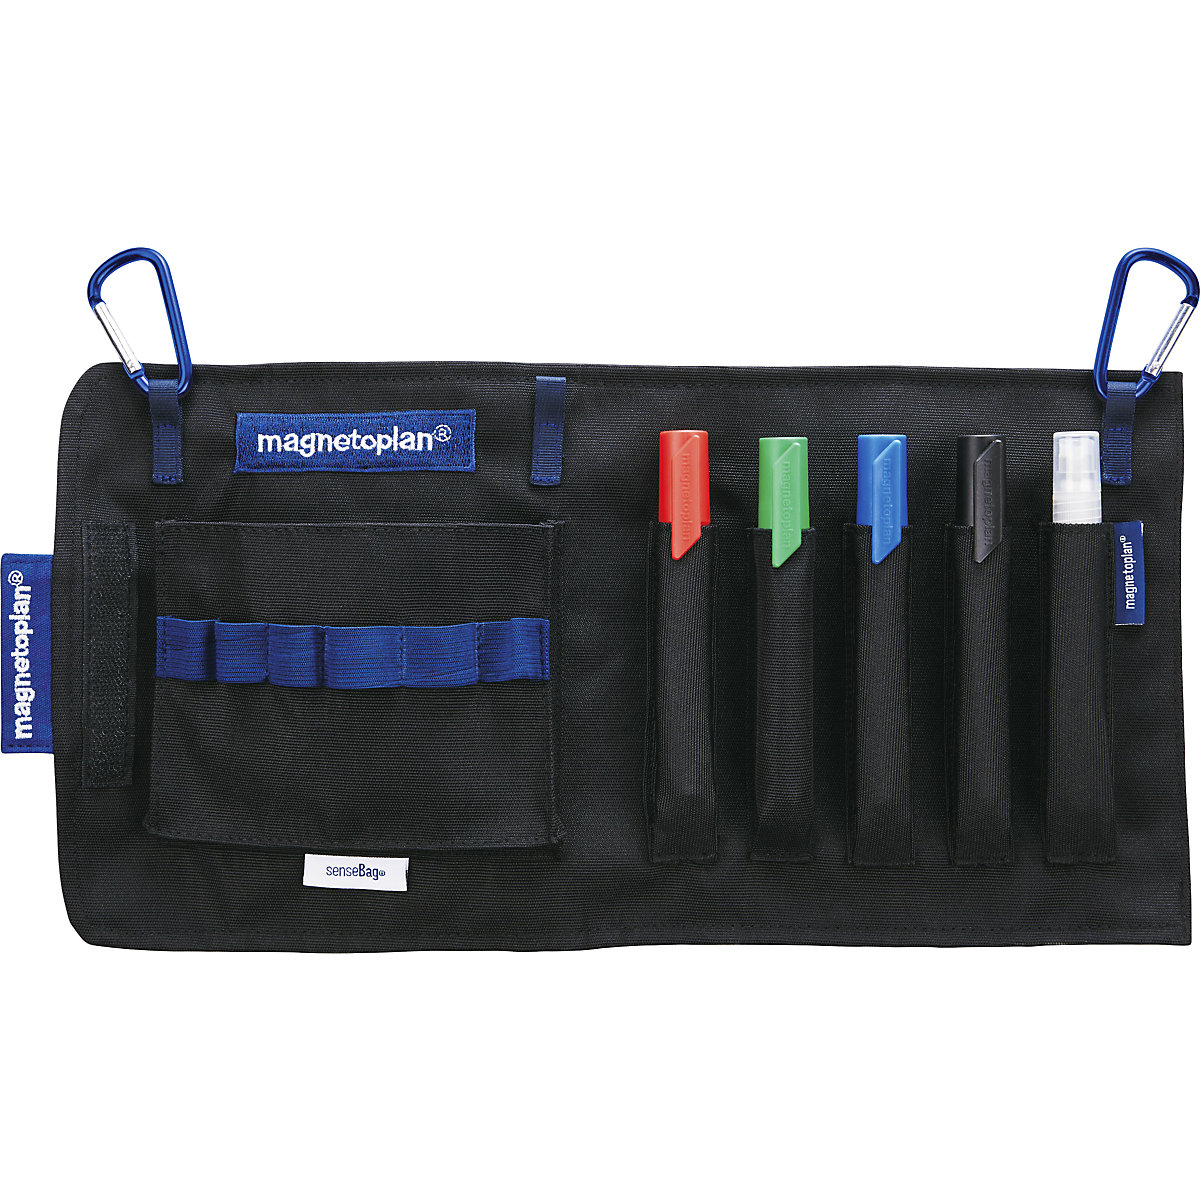 ACTION WALLET presentation pouch - magnetoplan